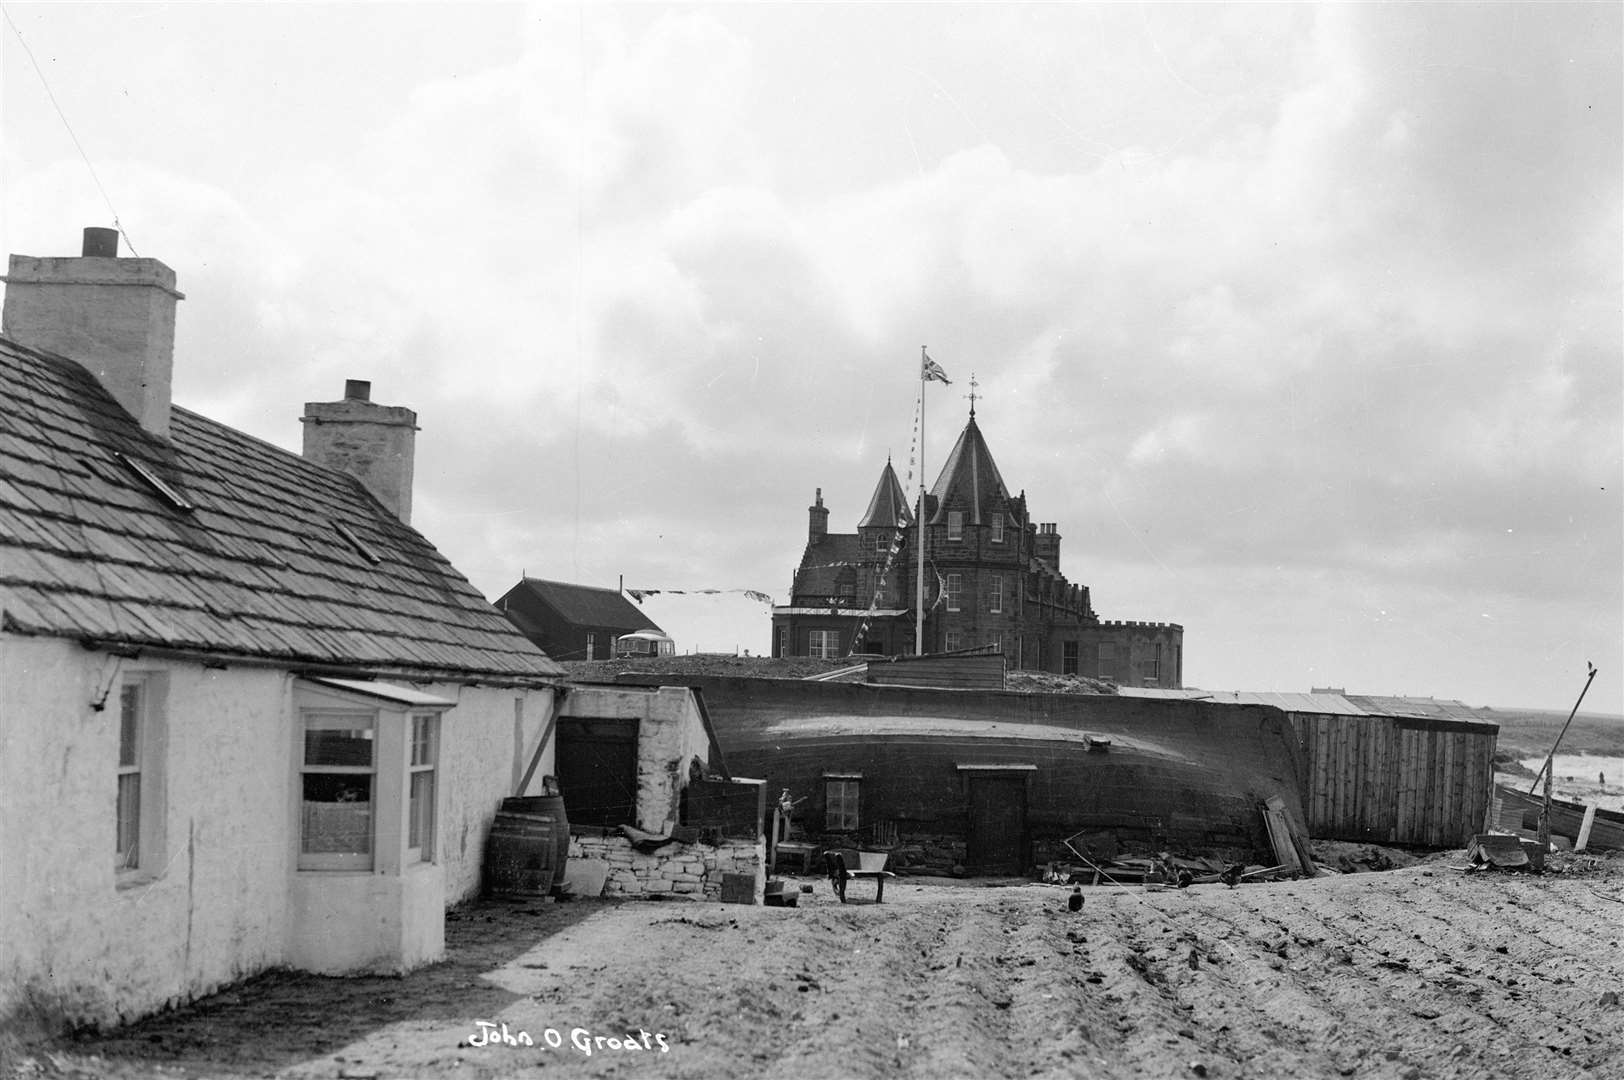 An archive view of John O'Groats showing the Last House on the left. The building is believed to date back more than a century. Picture from the Johnston Collection, reproduced courtesy of The Wick Society